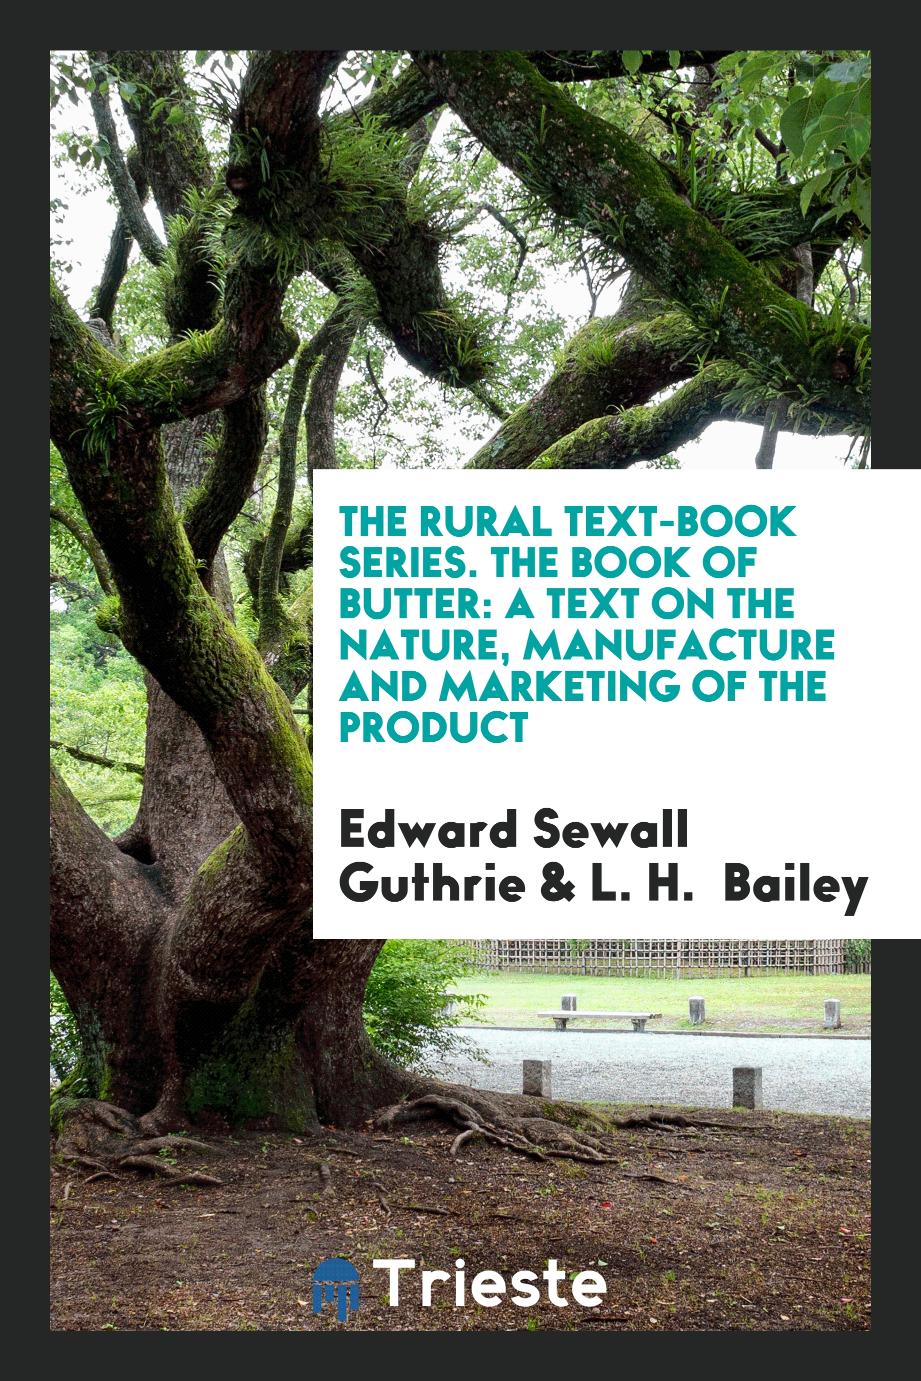 The Rural Text-Book Series. The Book of Butter: A Text on the Nature, Manufacture and Marketing of the Product